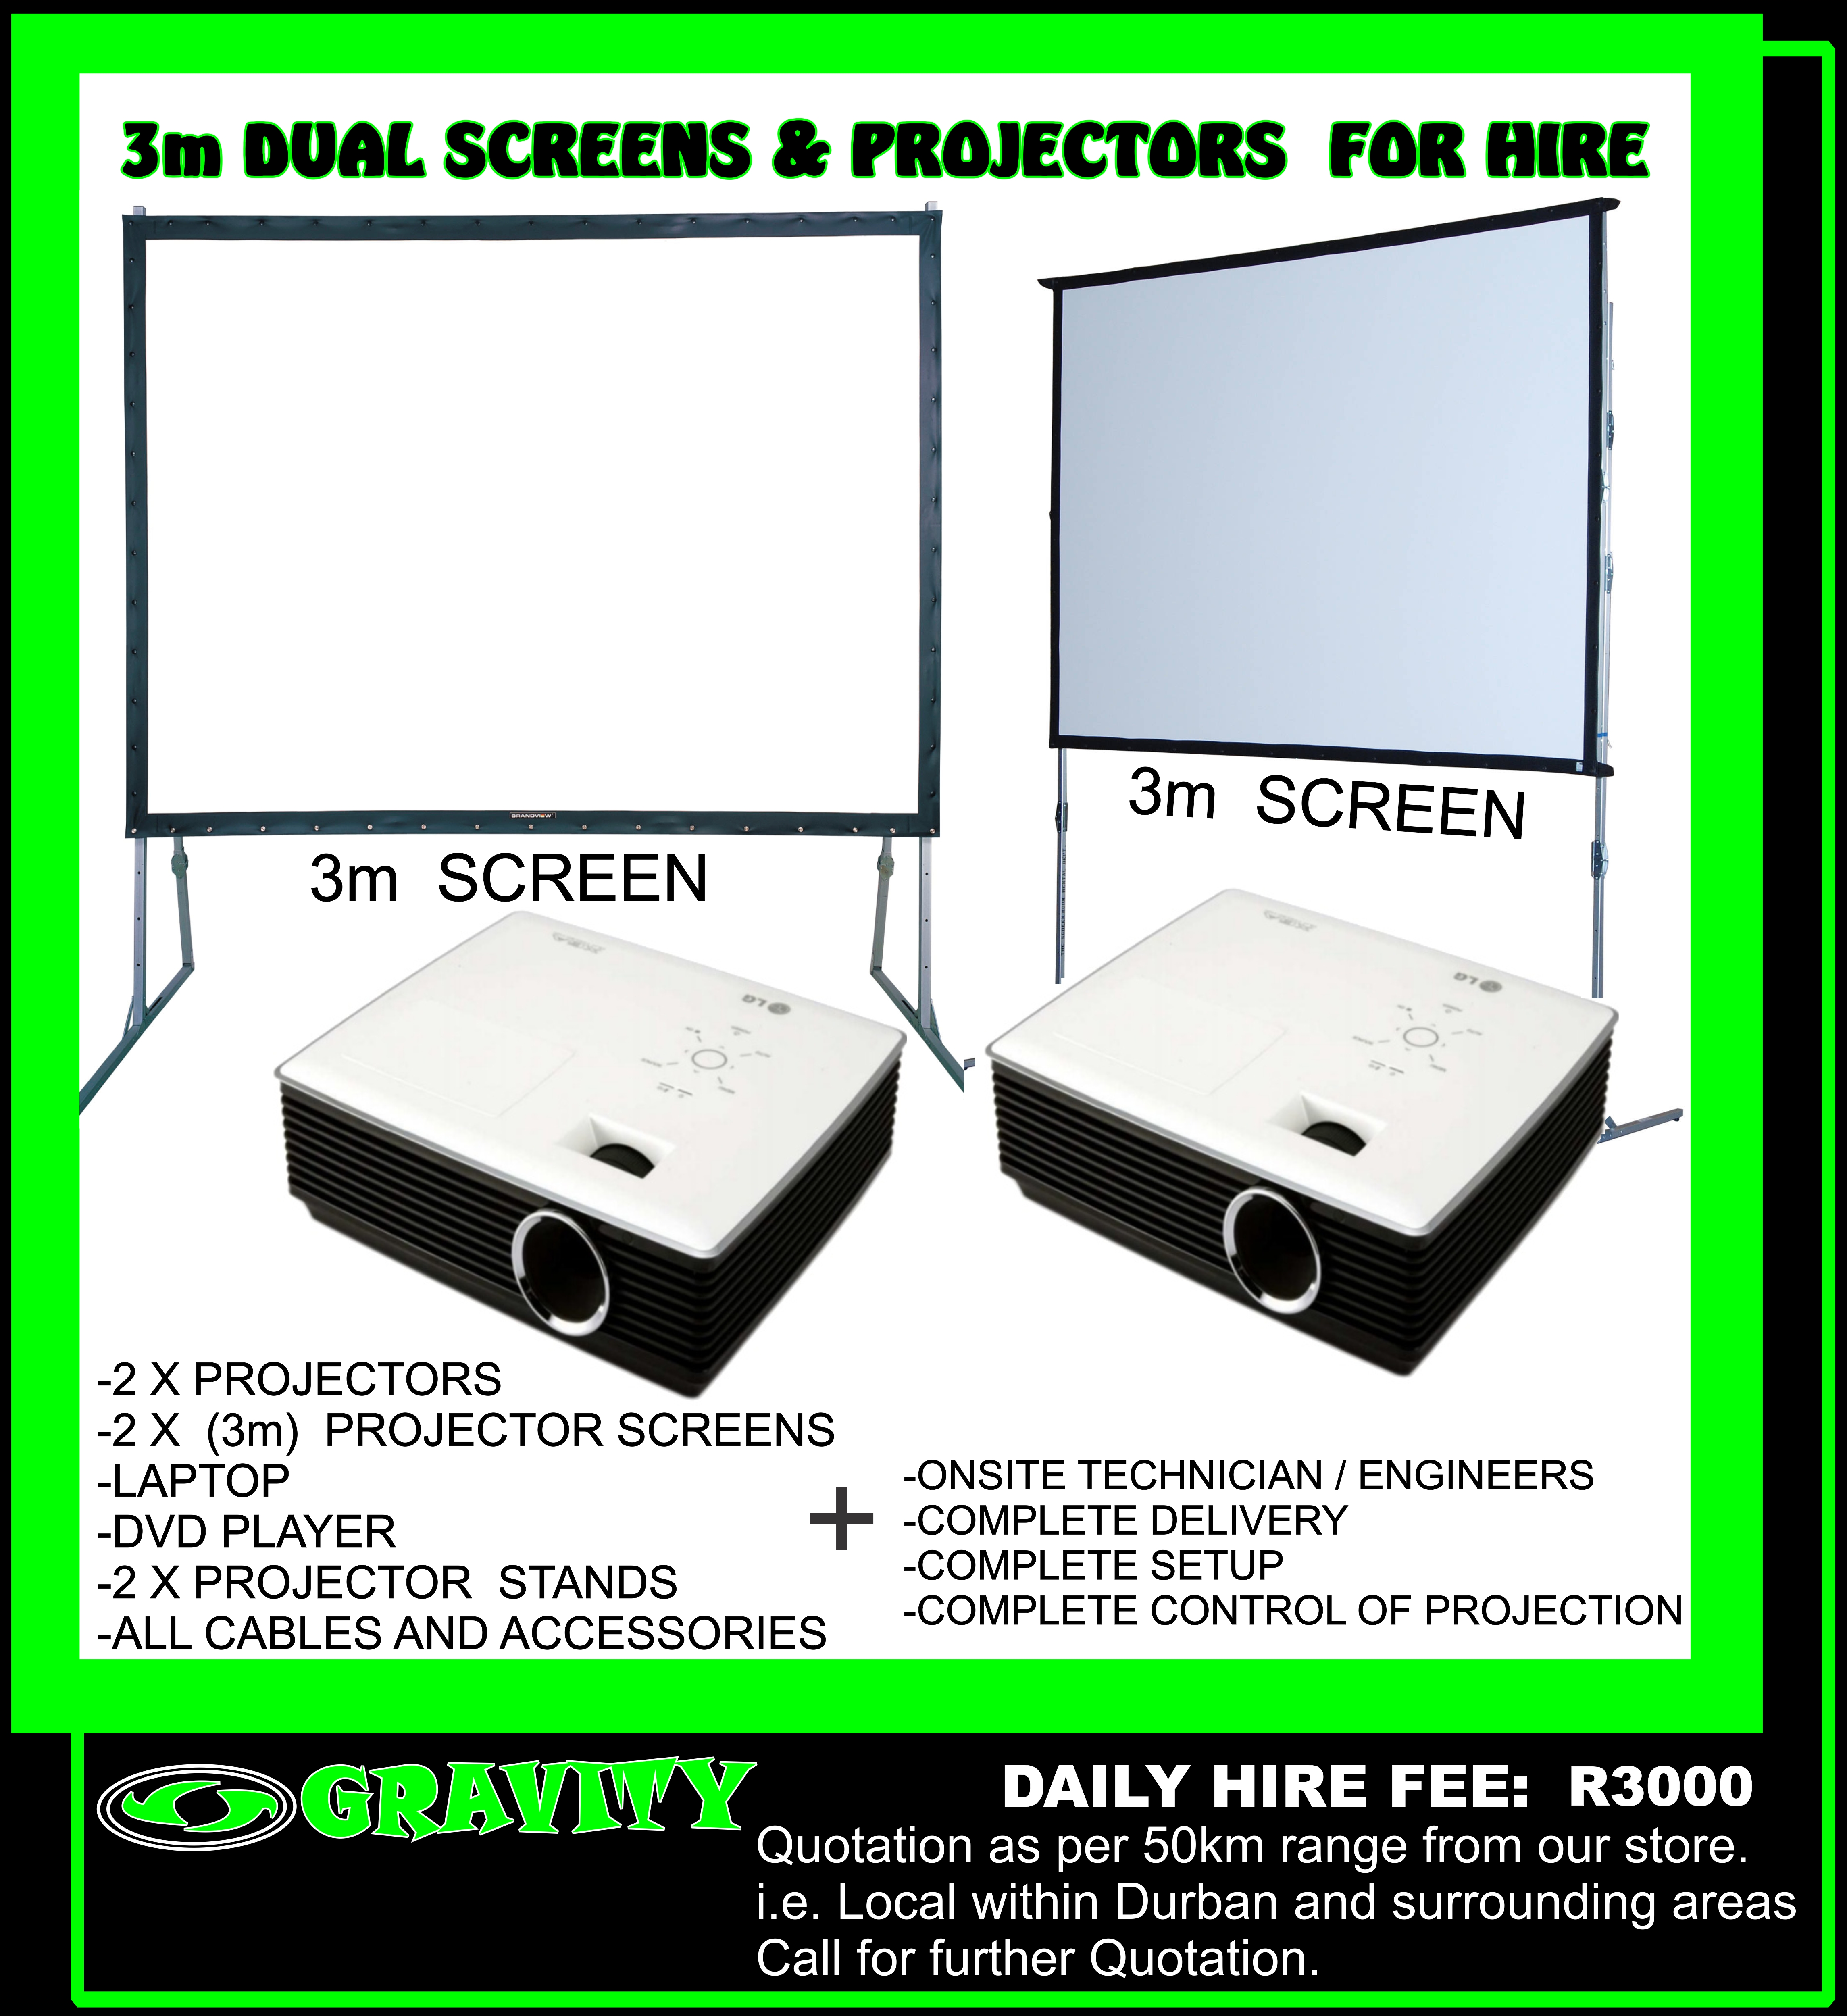 PROJECTOR AND 3m SCREEN FOR HIRE IN DURBAN IDEAL FOR A SLIDE SHOW FOR A WEDDING BIRTHDAY DEATH CEREMONY CONFERENCE SHOW EVENTS PROJECTS AND SCREEN DAY HIRE ONLY AT GRAVITY SOUND AND LIGHTING WAREHOUSE DURBAN 0315072736 PROJECTOR LAPTOP POWERPOINT PRESENTATIONS ONTO A BIG SCREEN NOW AVAILABLE AT GRAVITY DJ STORE ON A DAILY HIRE FEE 0315072463